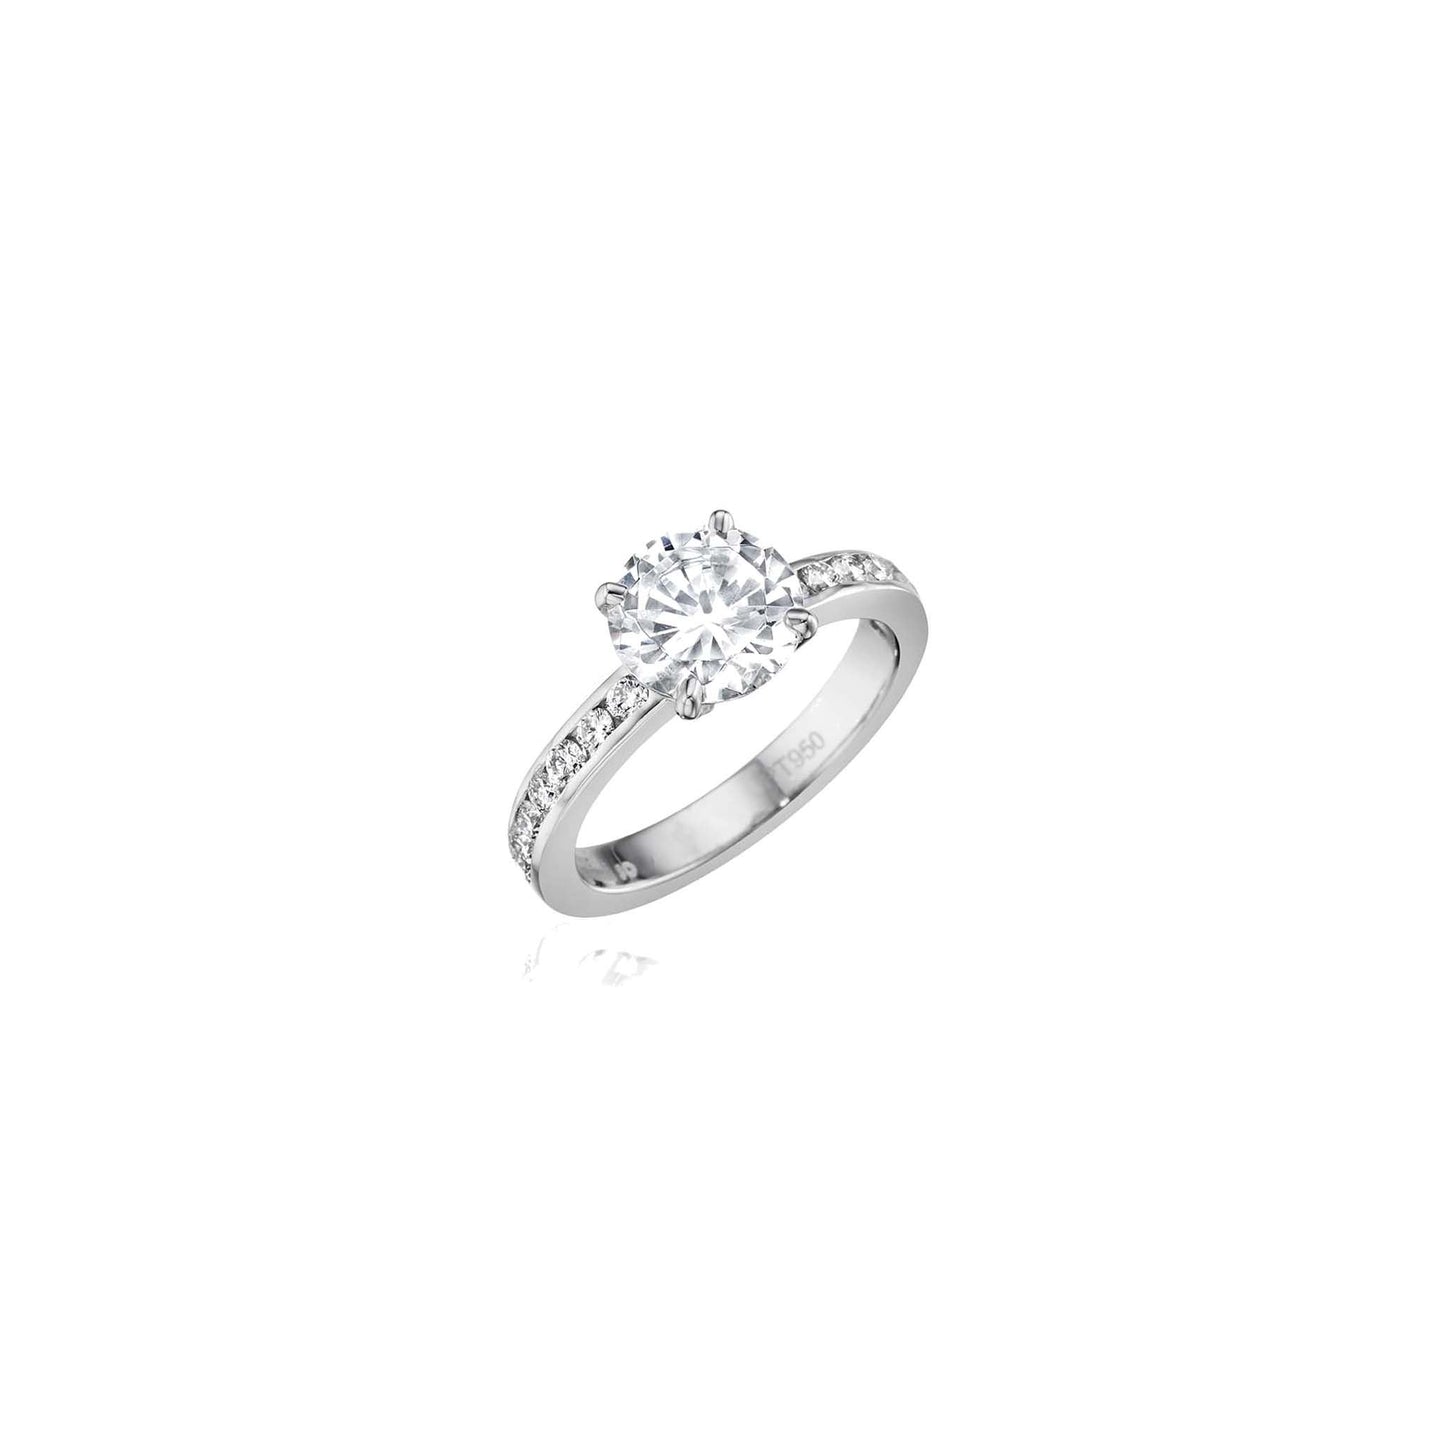 Canal Channel Set Diamond Engagement Ring